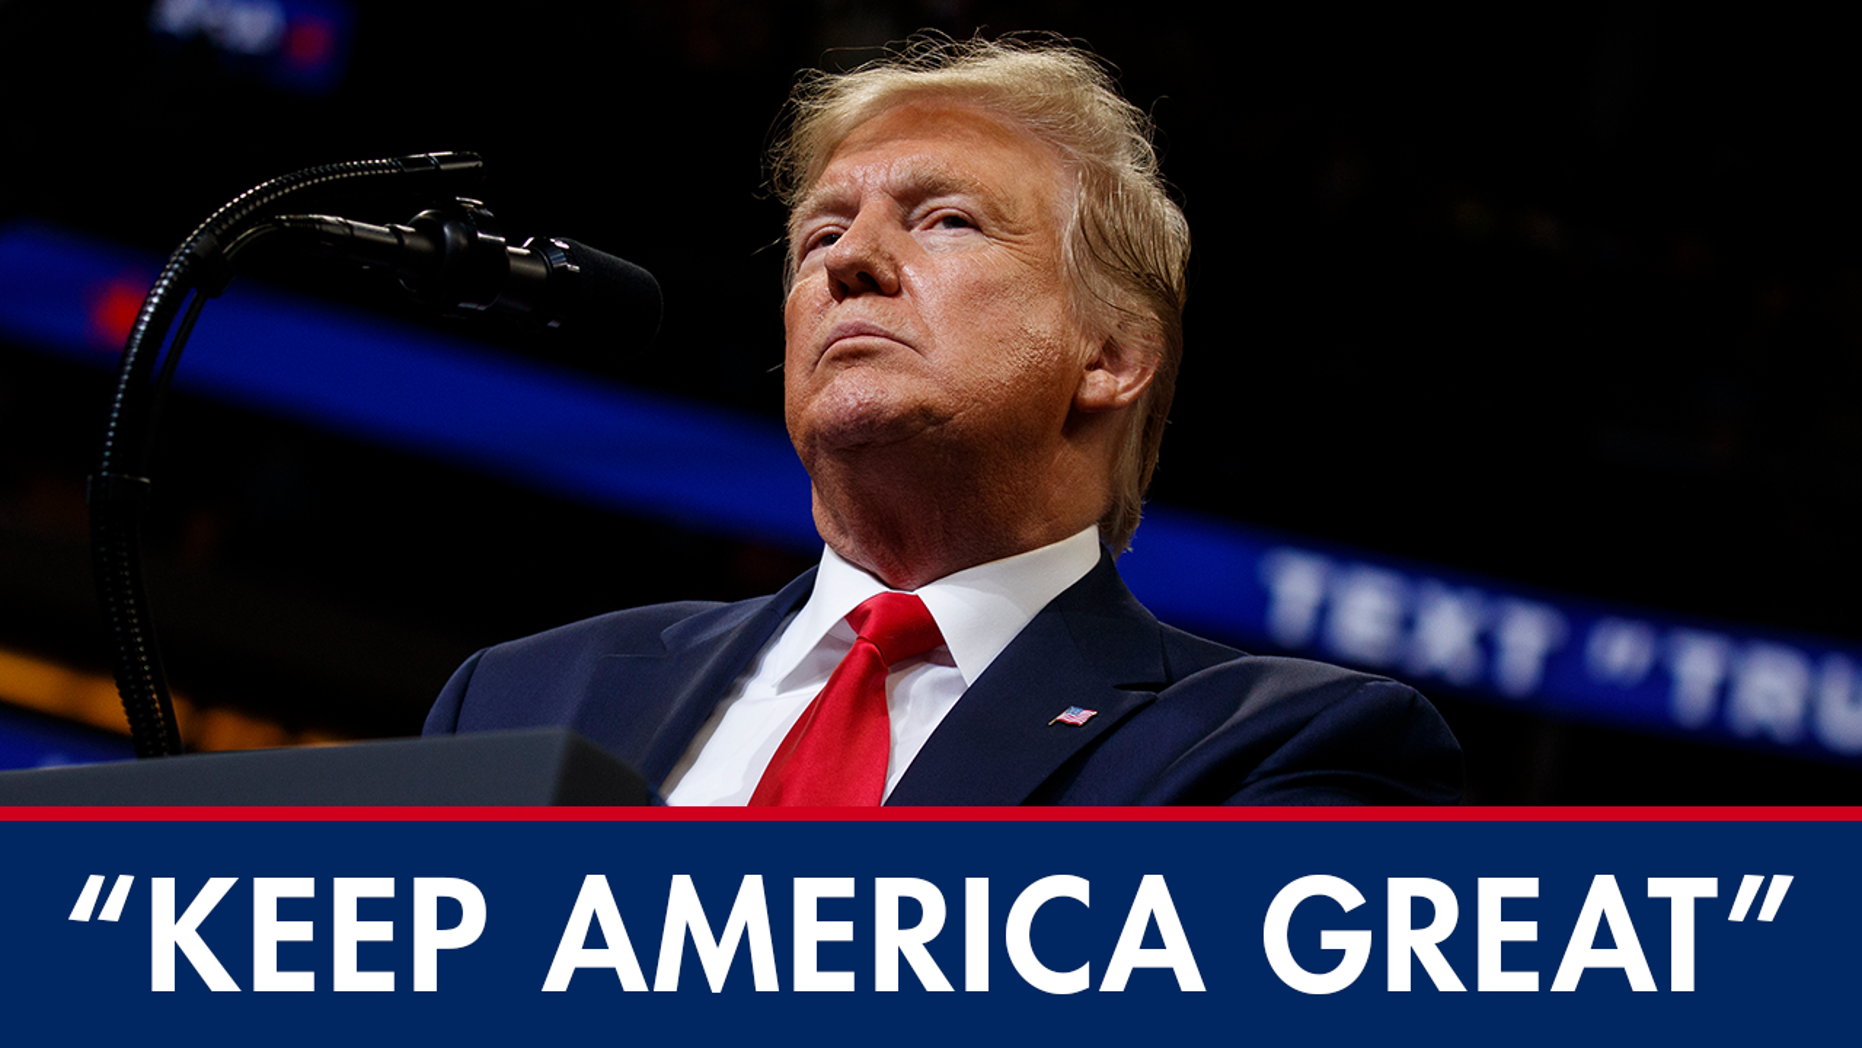 Trump makes his case to 'Keep America Great' in a 2nd term; AOC 'concentration camp ...